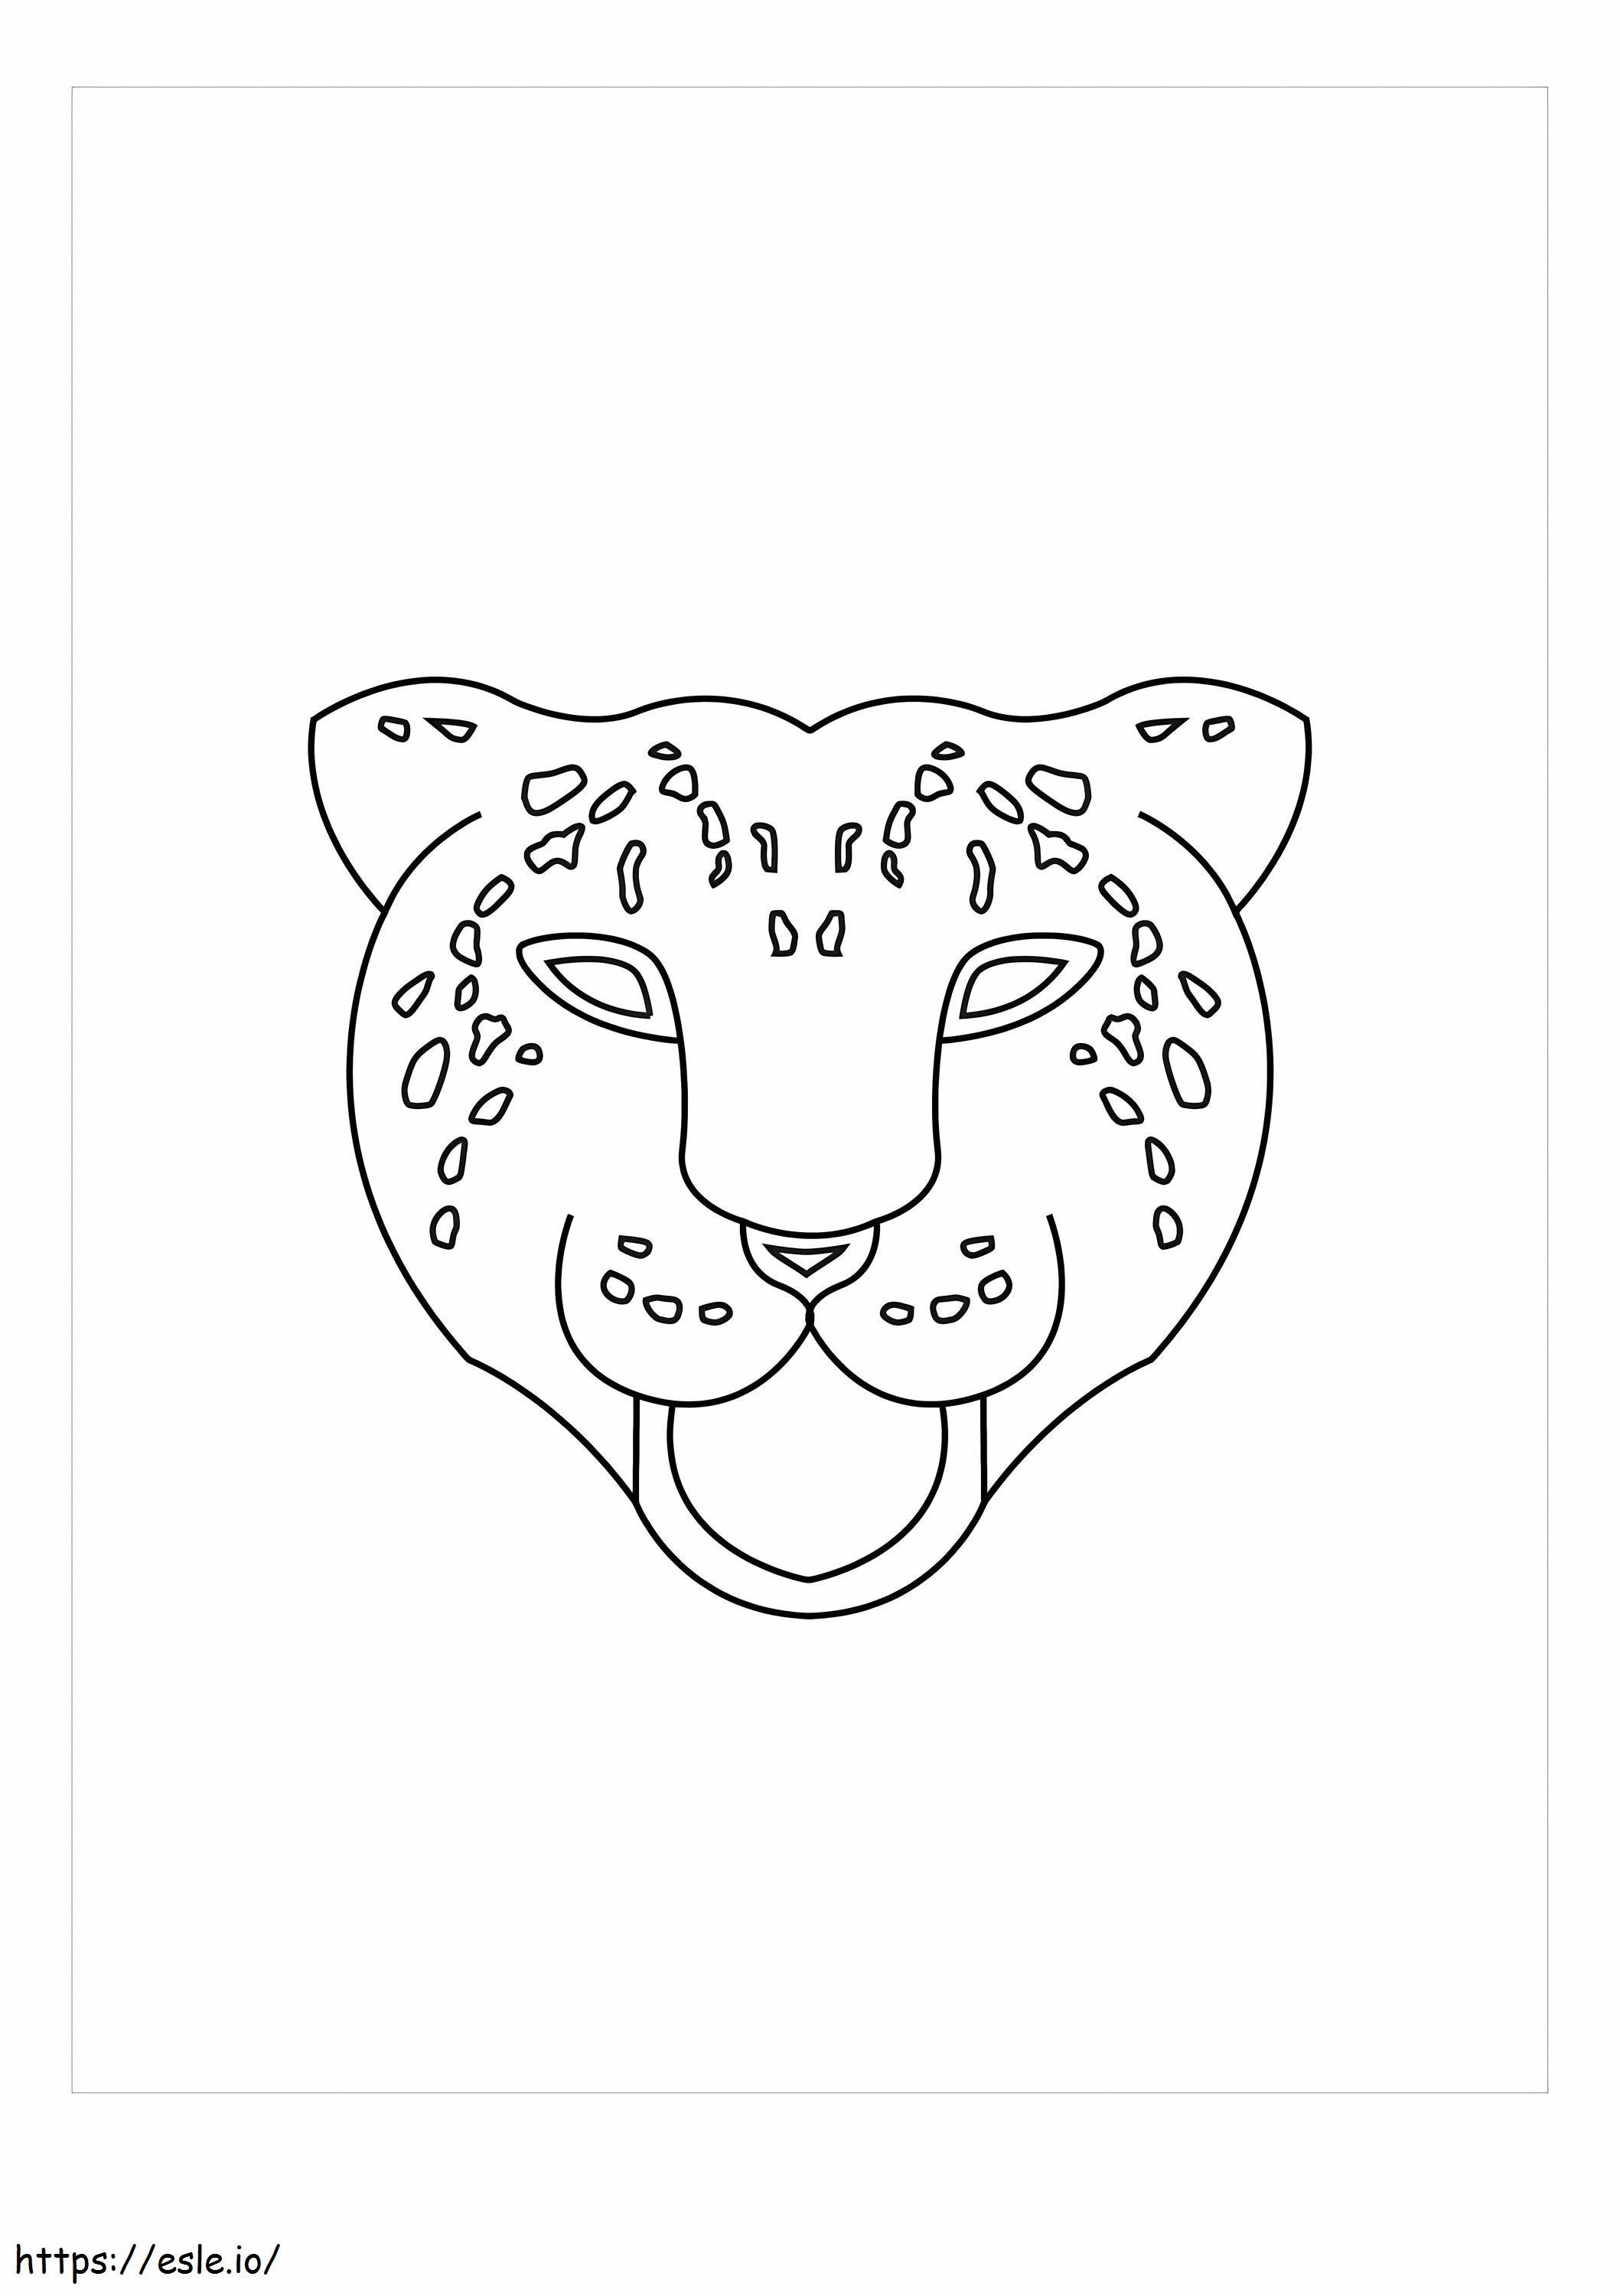 Cougar Mask coloring page